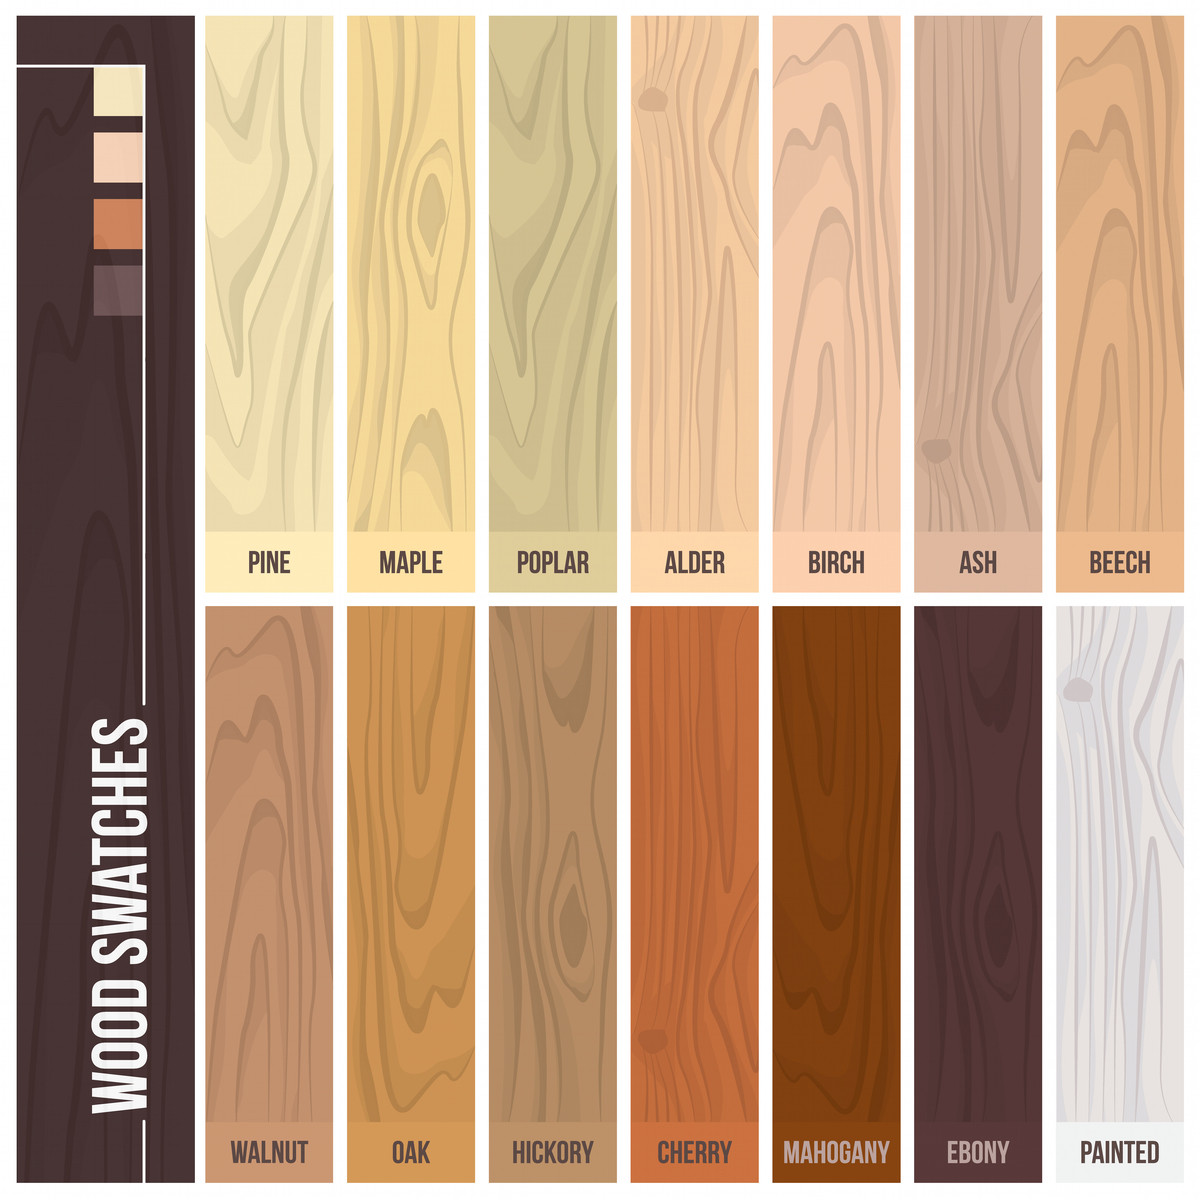 23 Famous 1 1 2 Hardwood Flooring 2024 free download 1 1 2 hardwood flooring of 12 types of hardwood flooring species styles edging dimensions intended for types of hardwood flooring illustrated guide